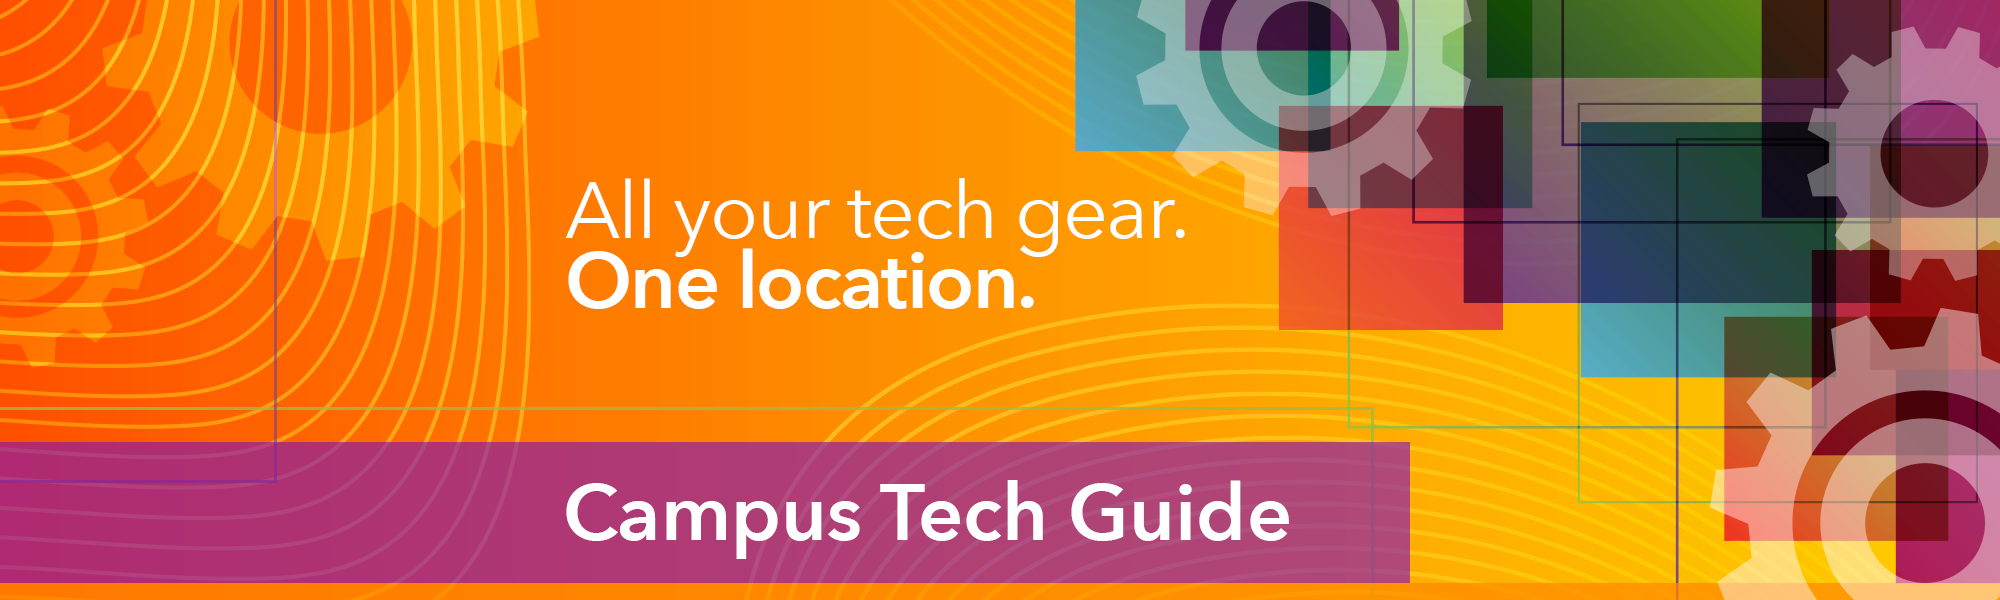 Campus Technology Guide